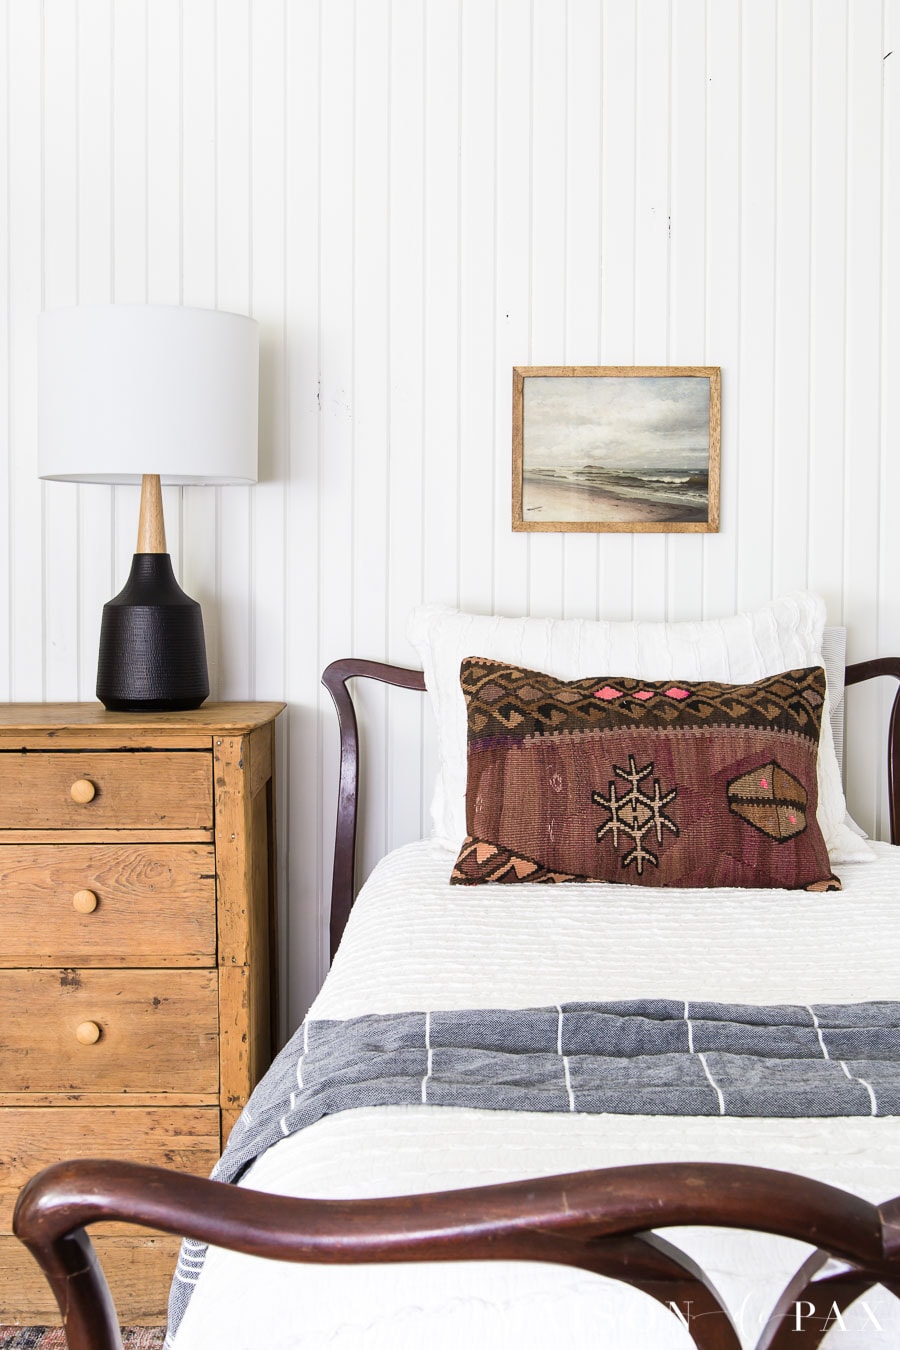 twin bed with white bedding, vintage rug pillow, and vintage art above bed | Maison de Pax